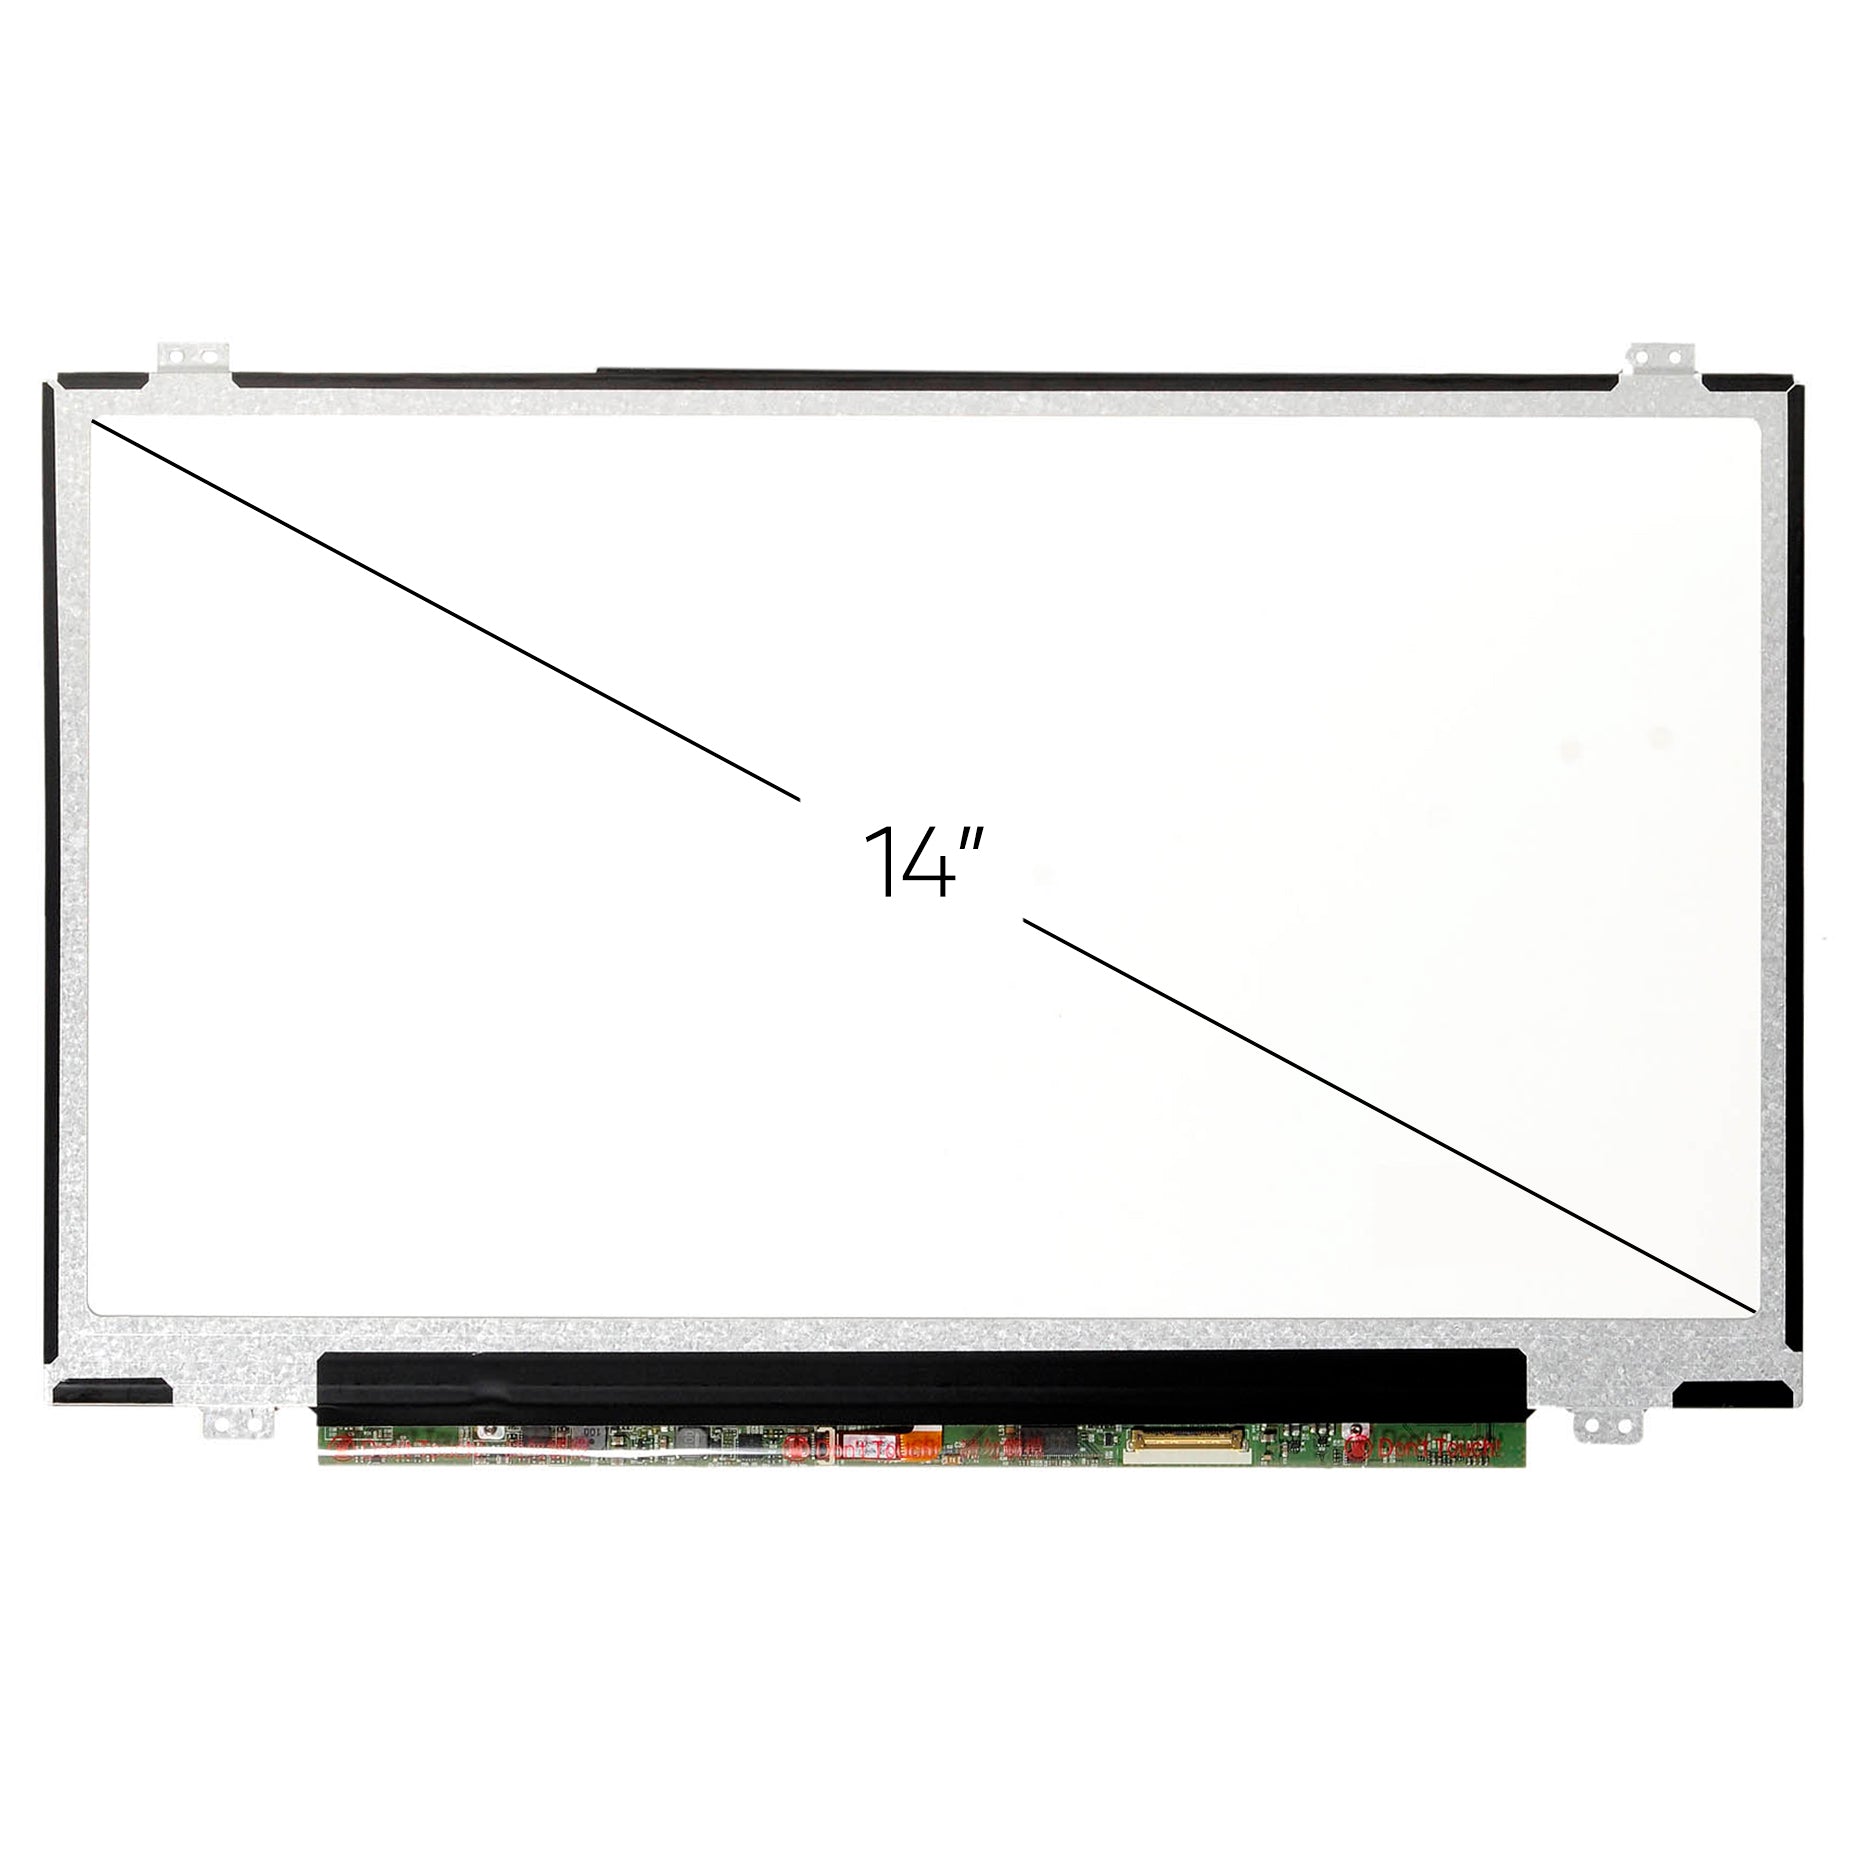 Screen Replacement for Dell Latitude 3490 P89G001 FHD 1920x1080 Matte LCD LED Display